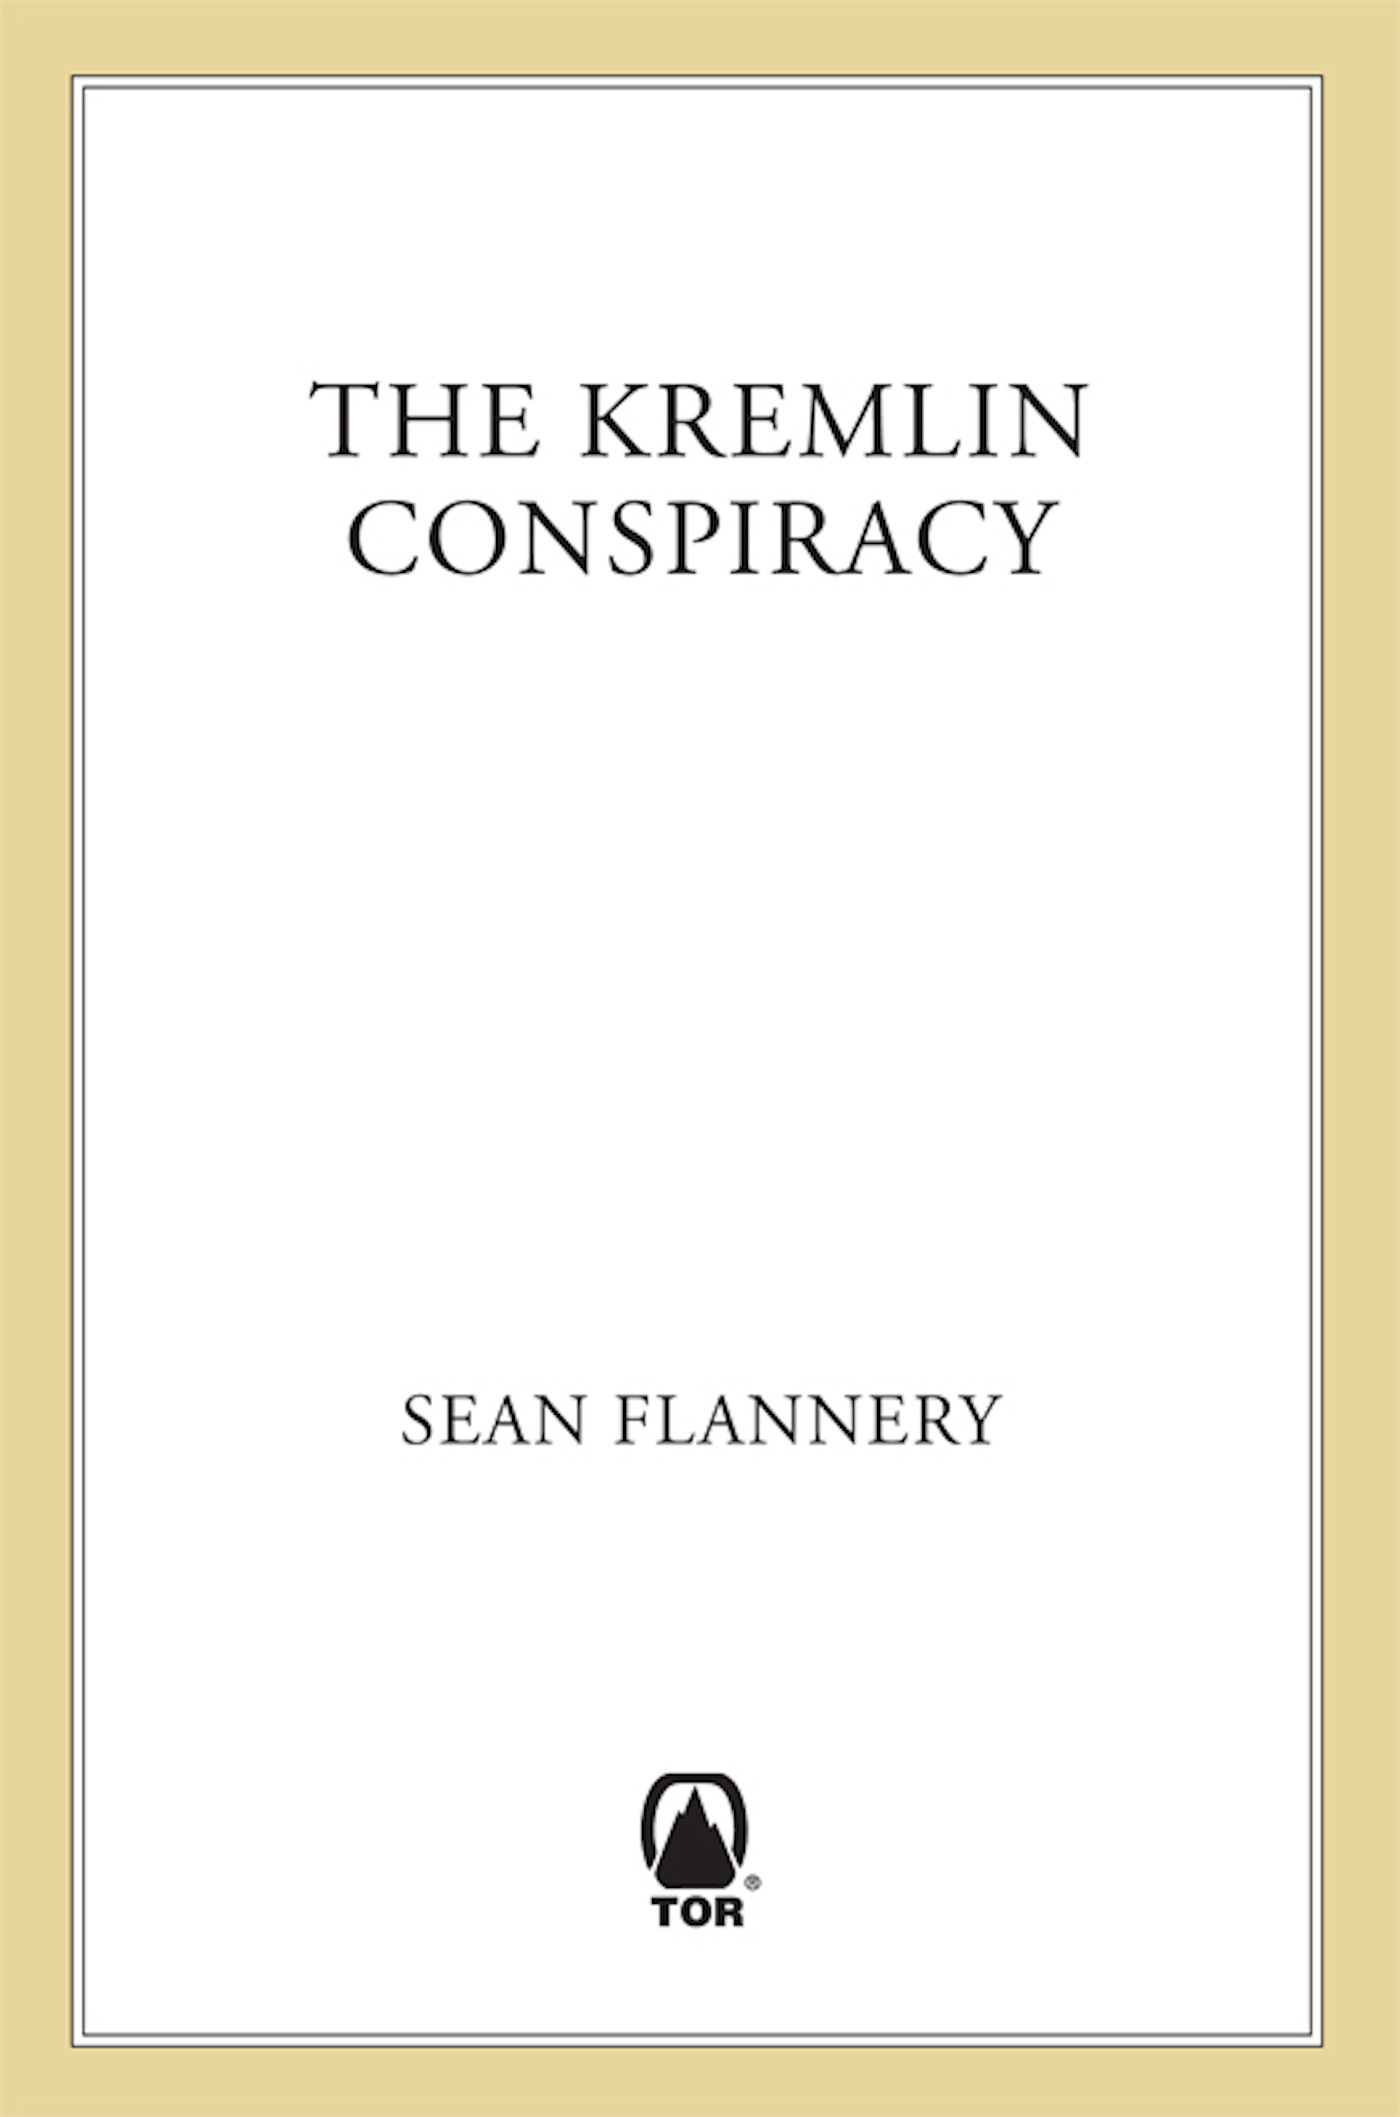 The Kremlin Conspiracy by Sean Flannery